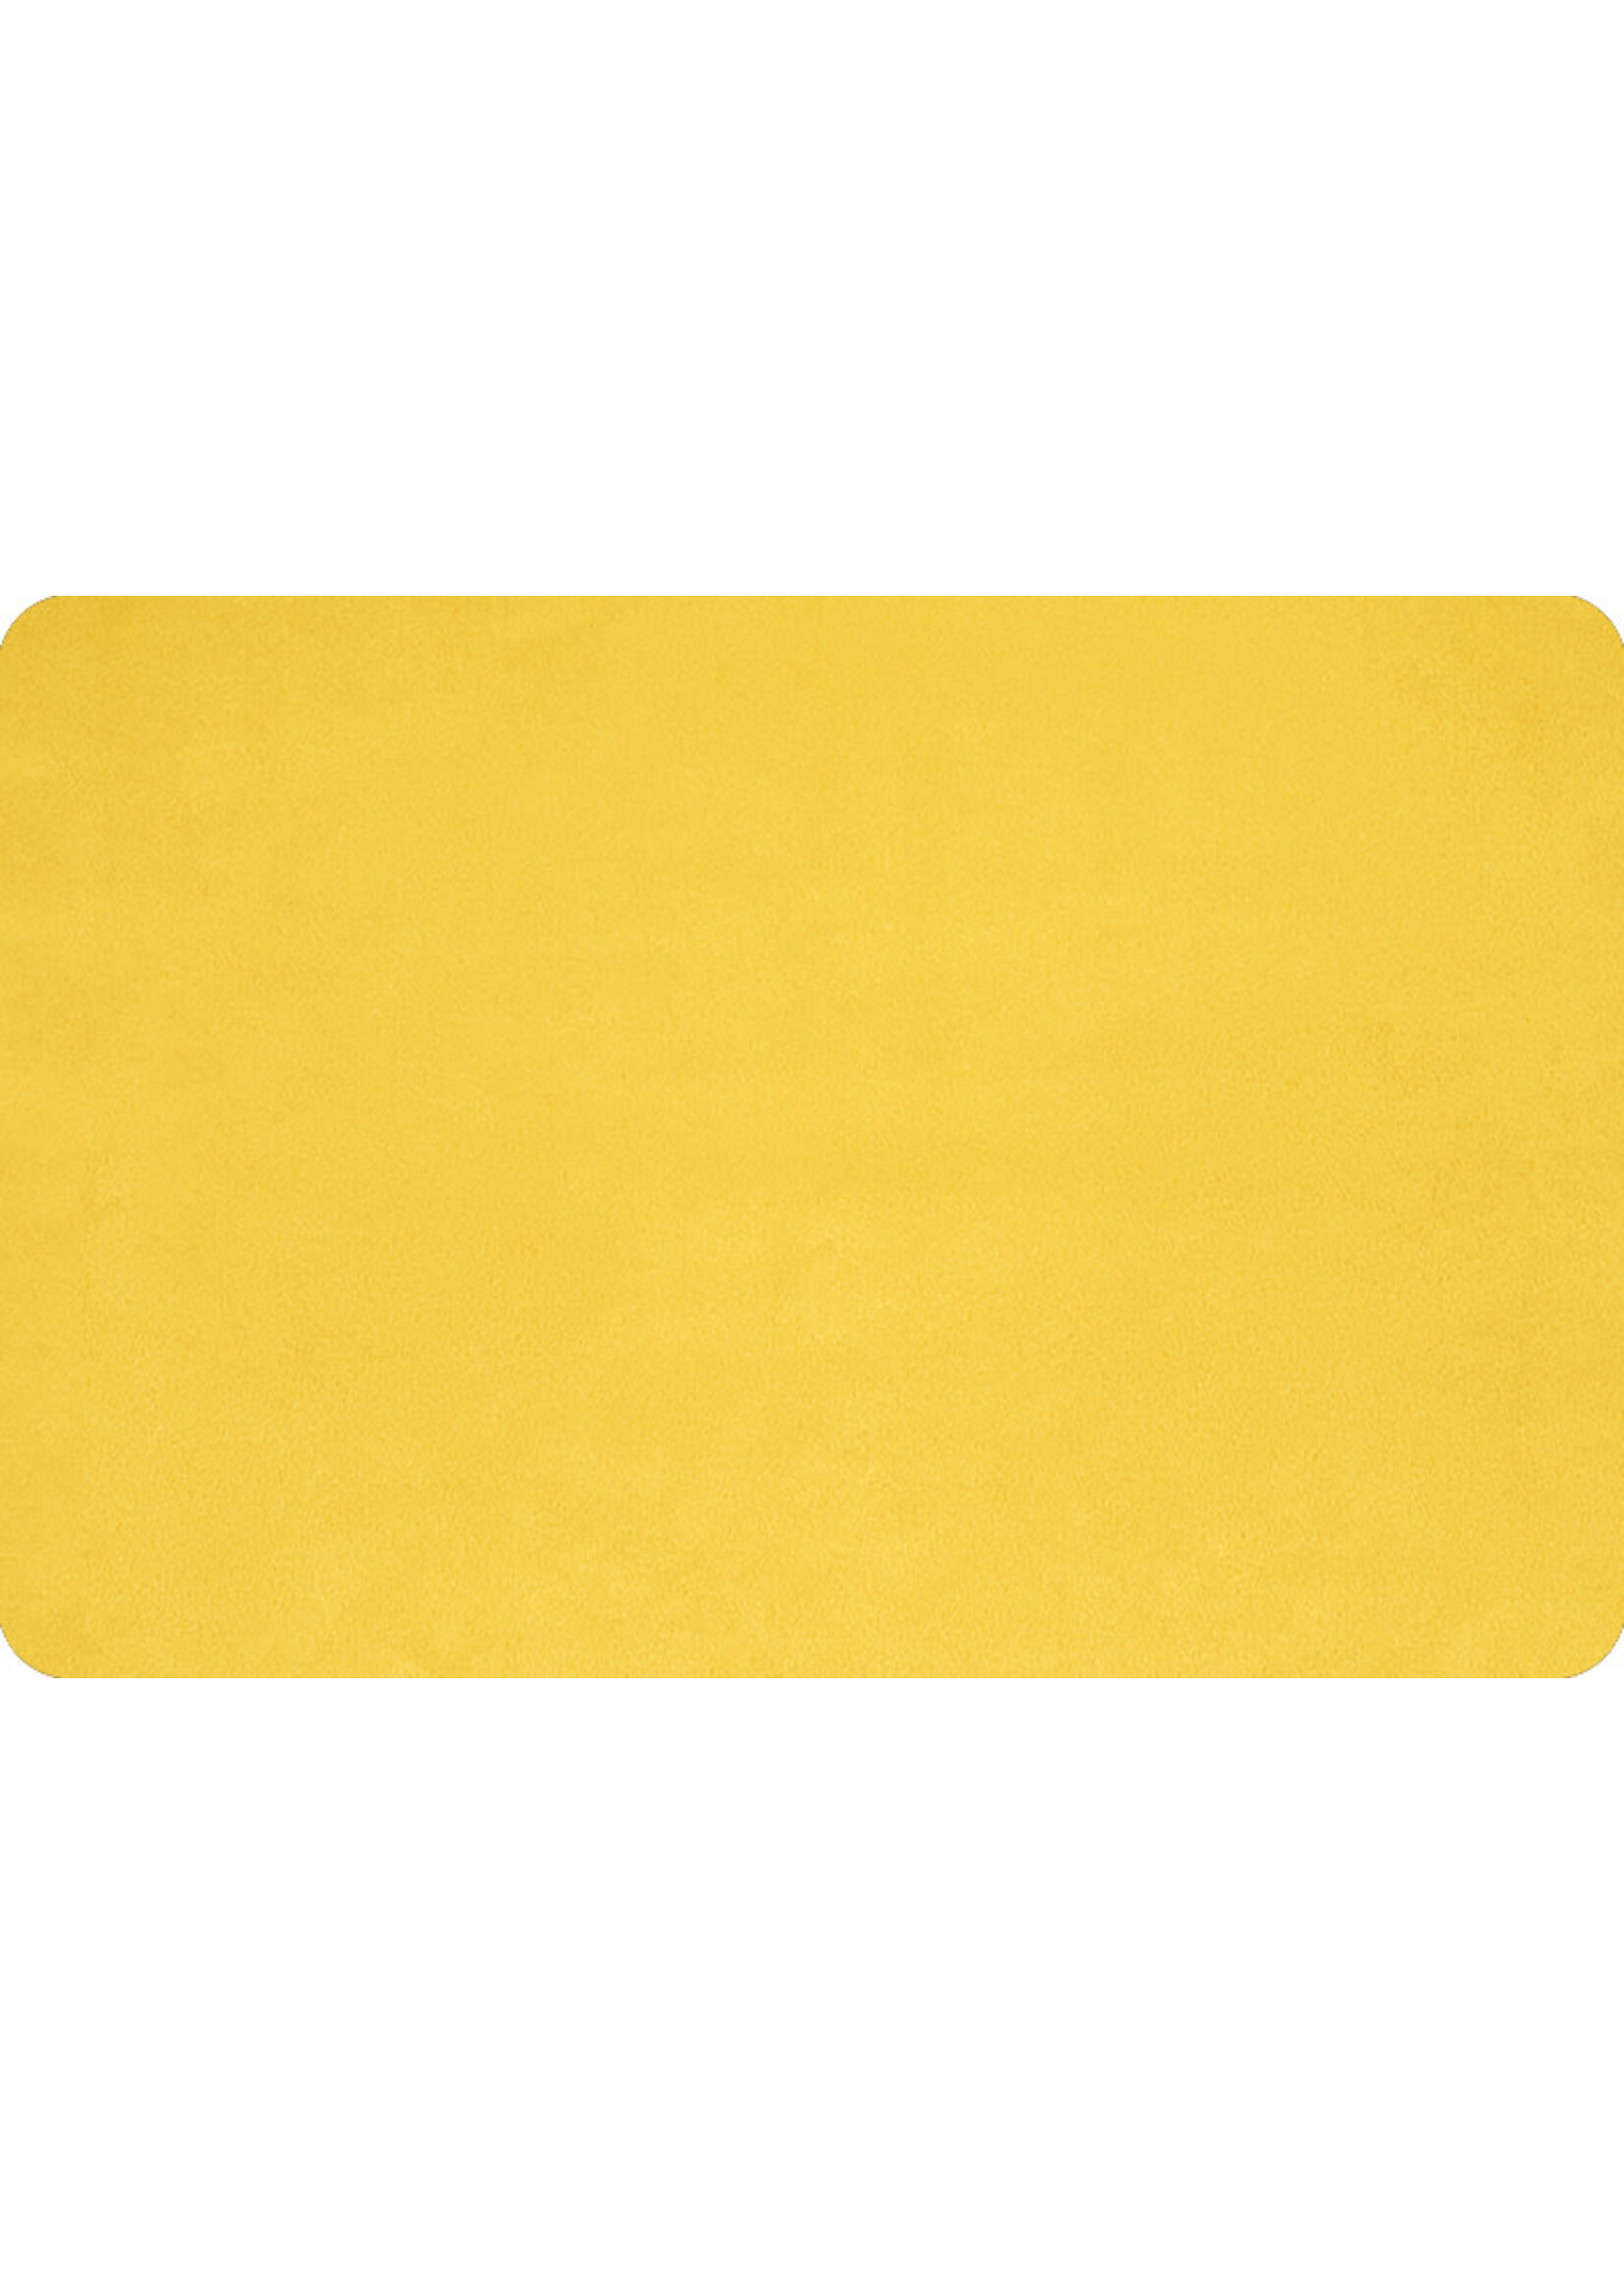 Shannon Fabrics Minky, Extra Wide Solid Cuddle3, 90" Sunshine, (by the inch)